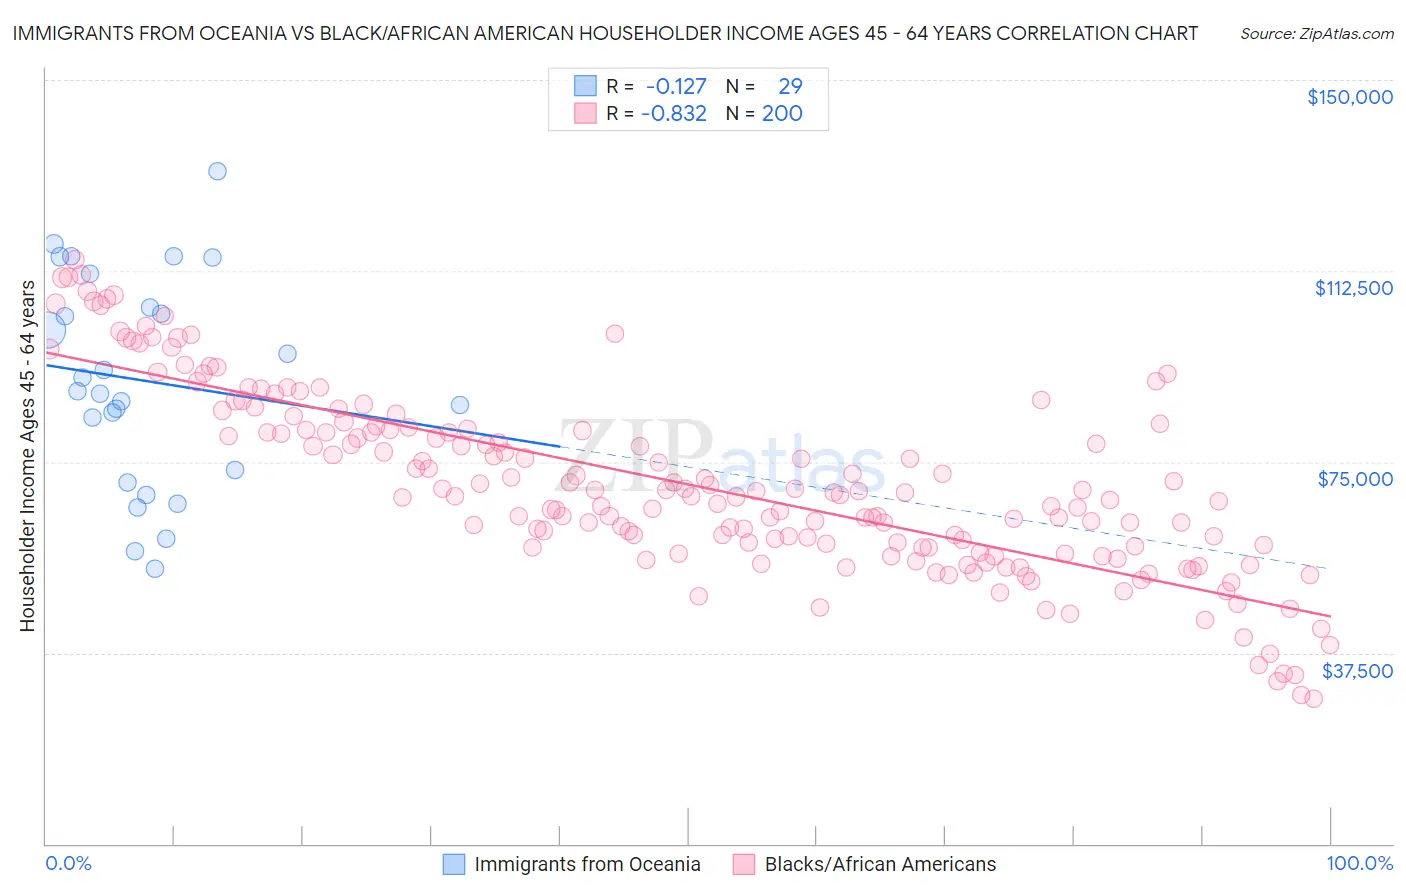 Immigrants from Oceania vs Black/African American Householder Income Ages 45 - 64 years